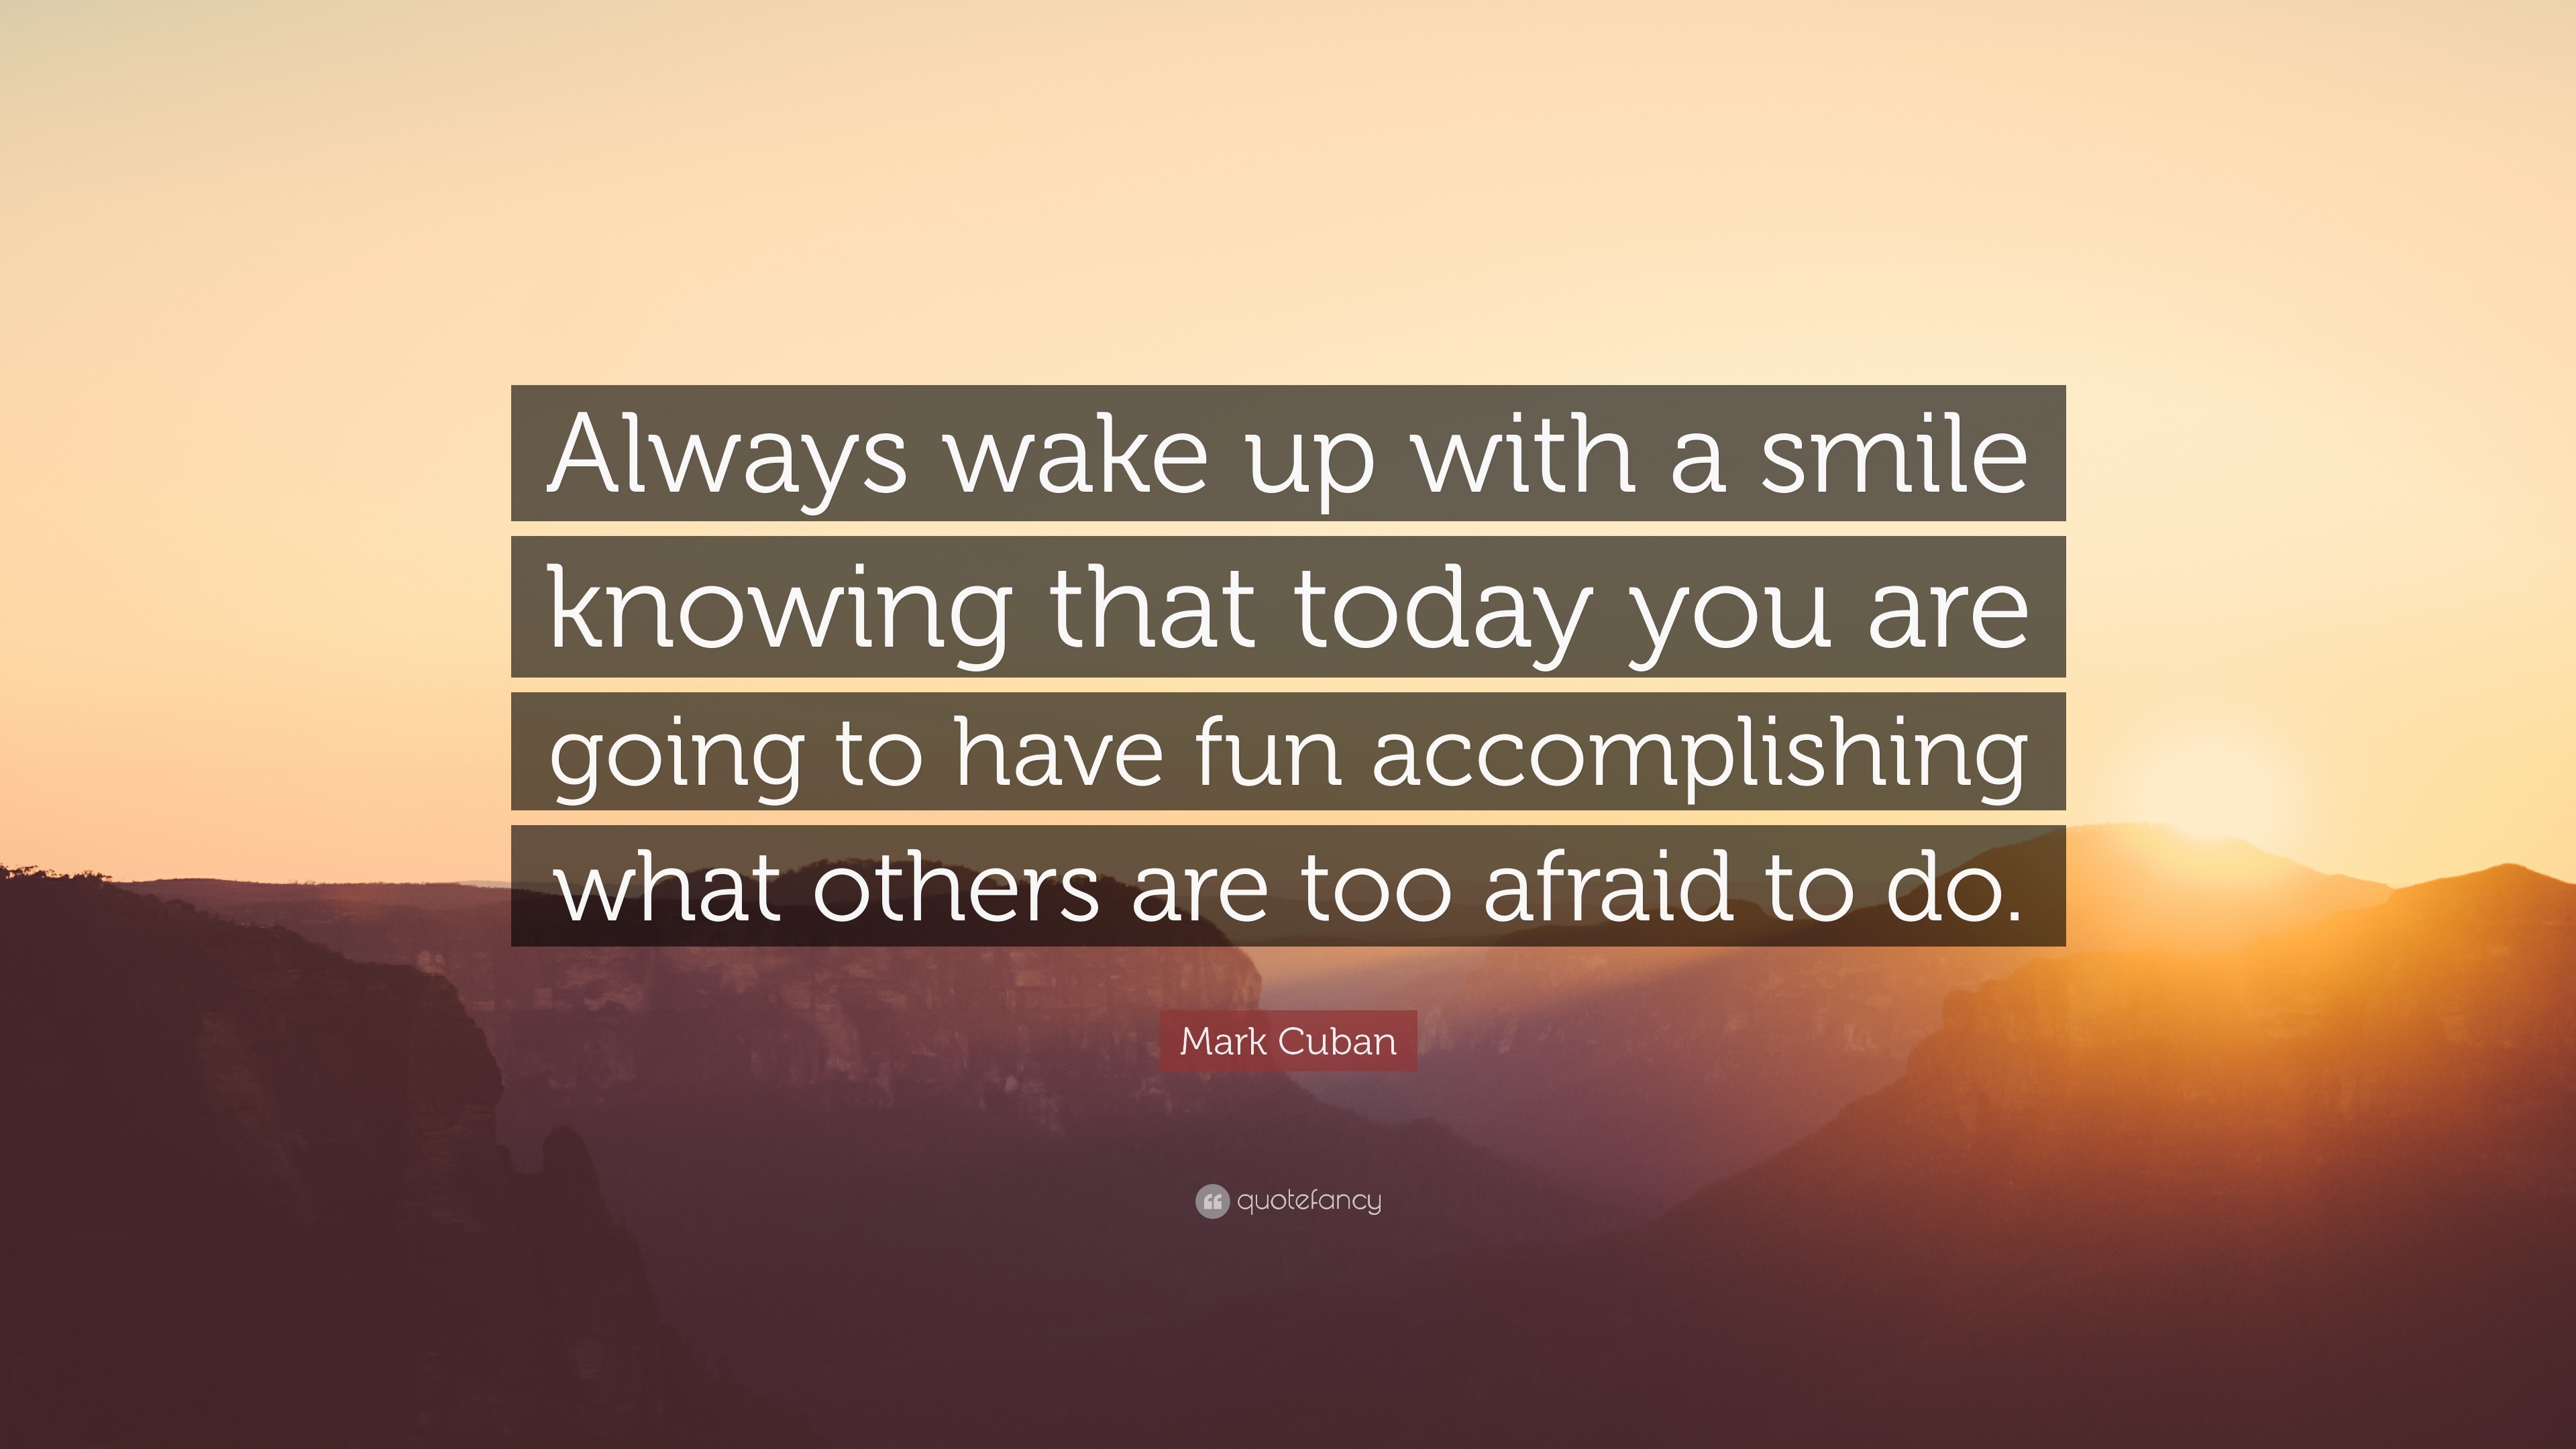 Mark Cuban Quote: “Always Wake Up With A Smile Knowing That Today You Are Going To